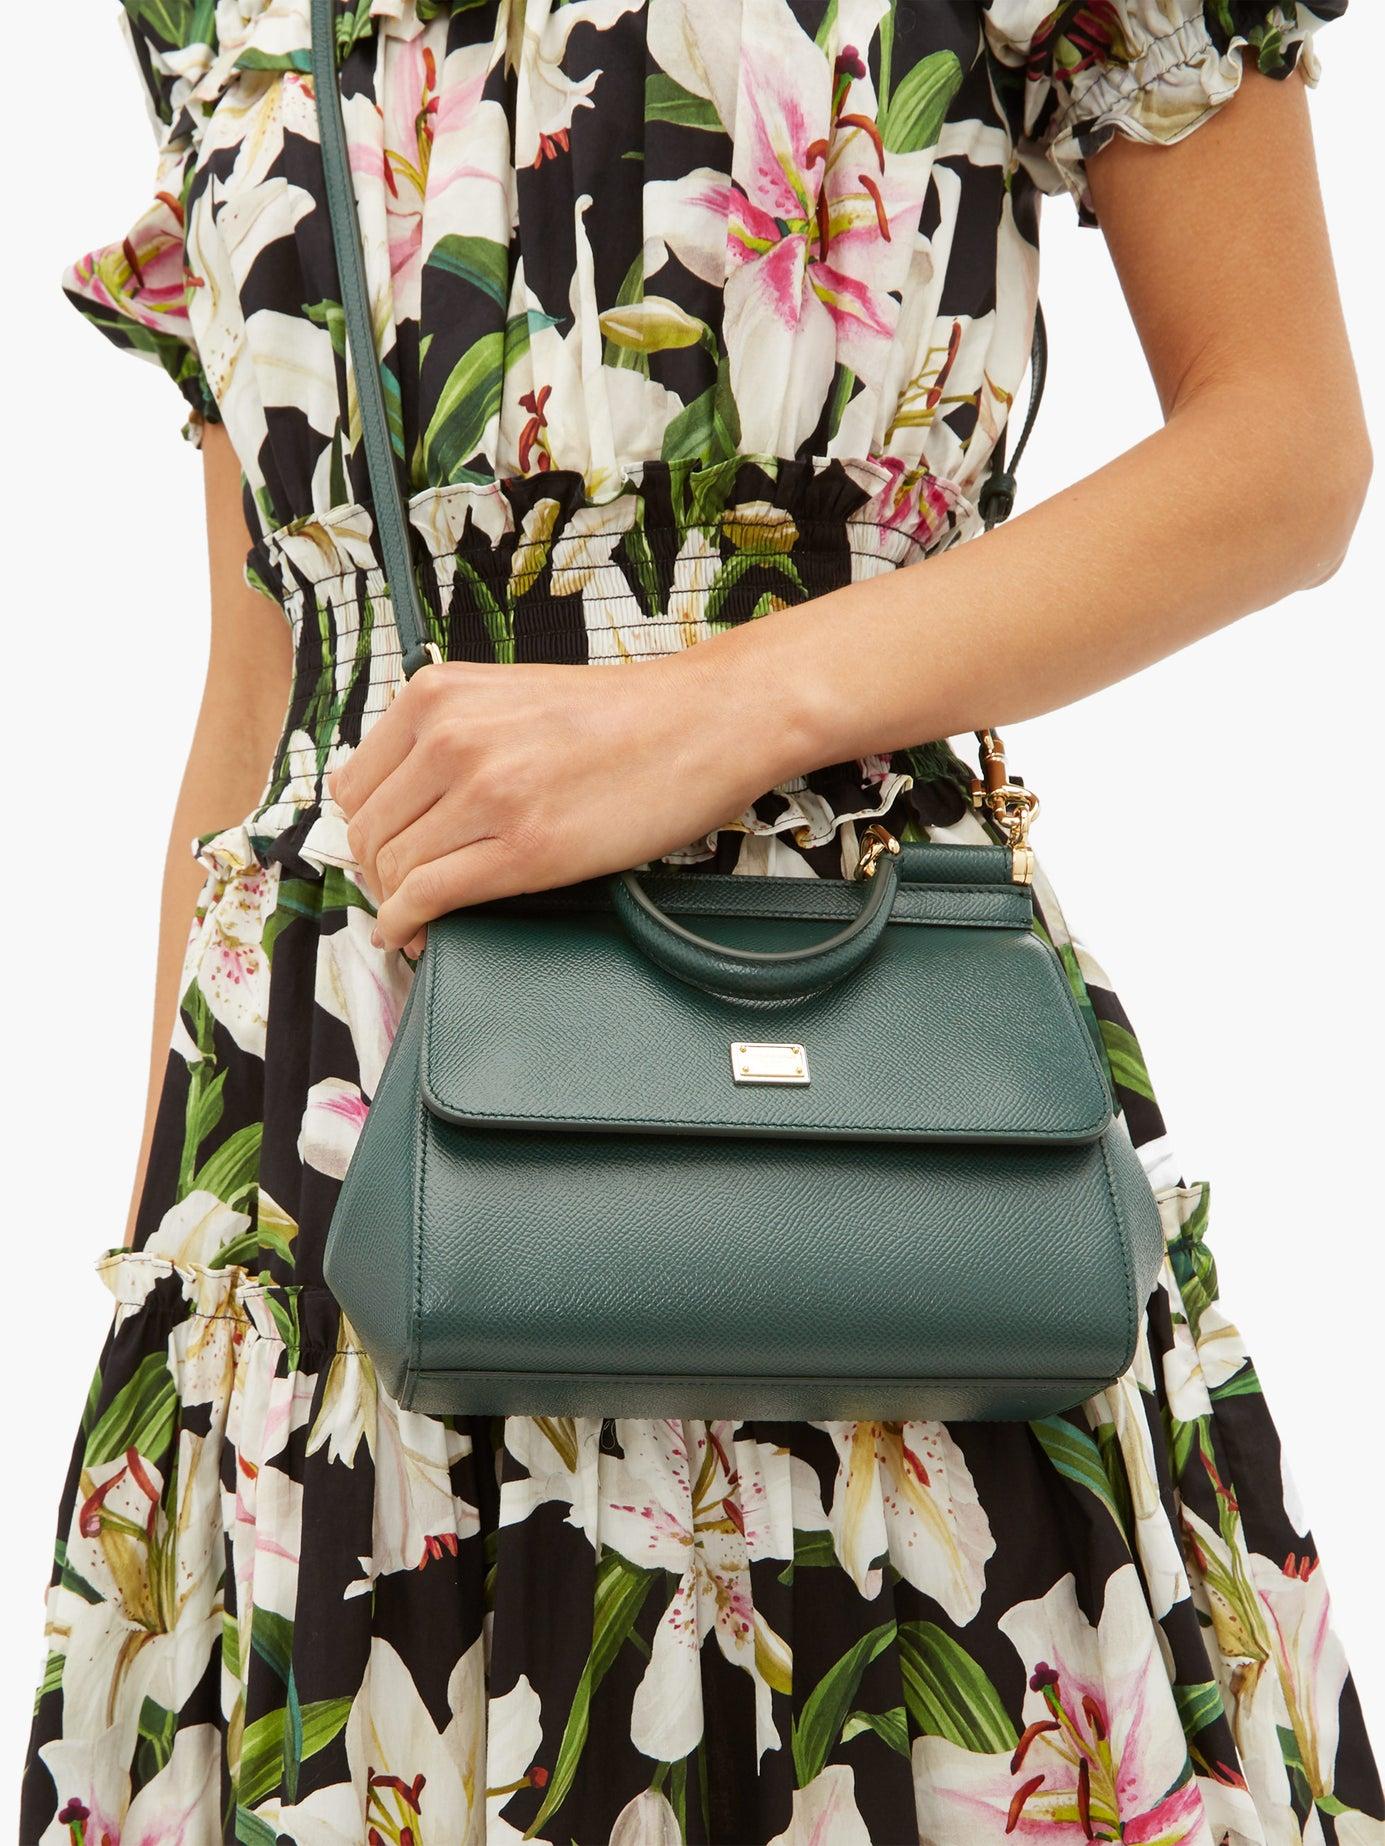 Dolce & Gabbana Small Dauphine Leather Sicily Bag in Green